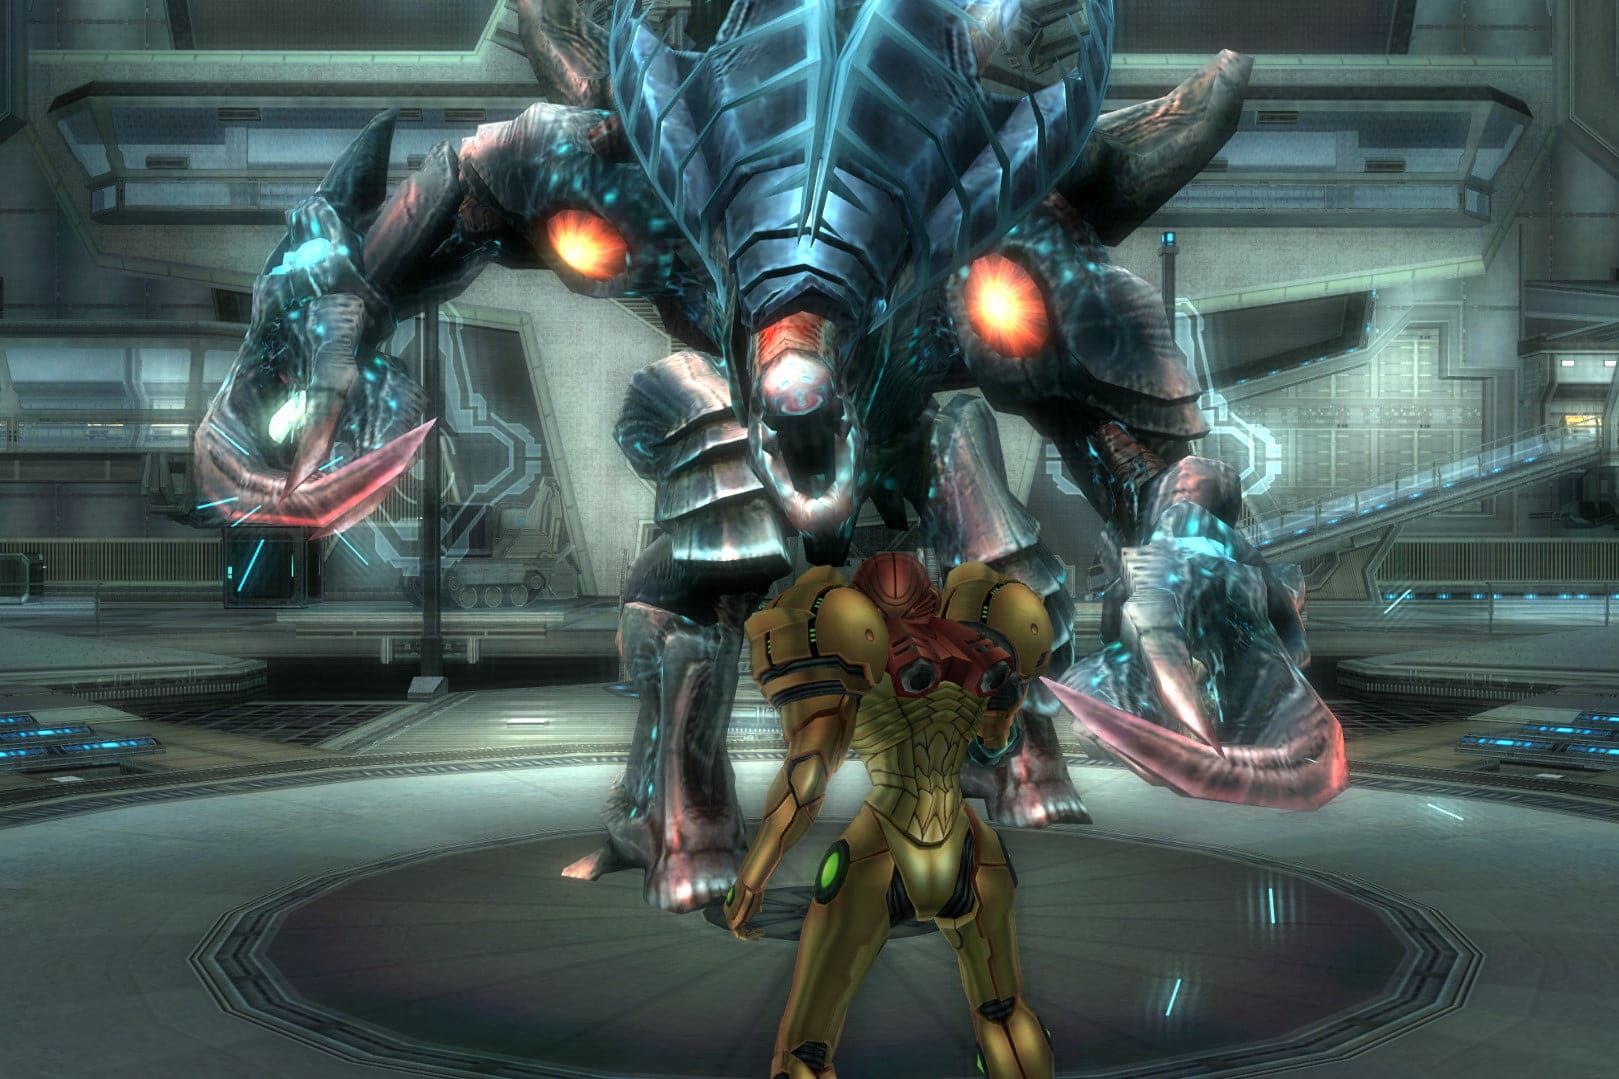 download metroid prime switch release date